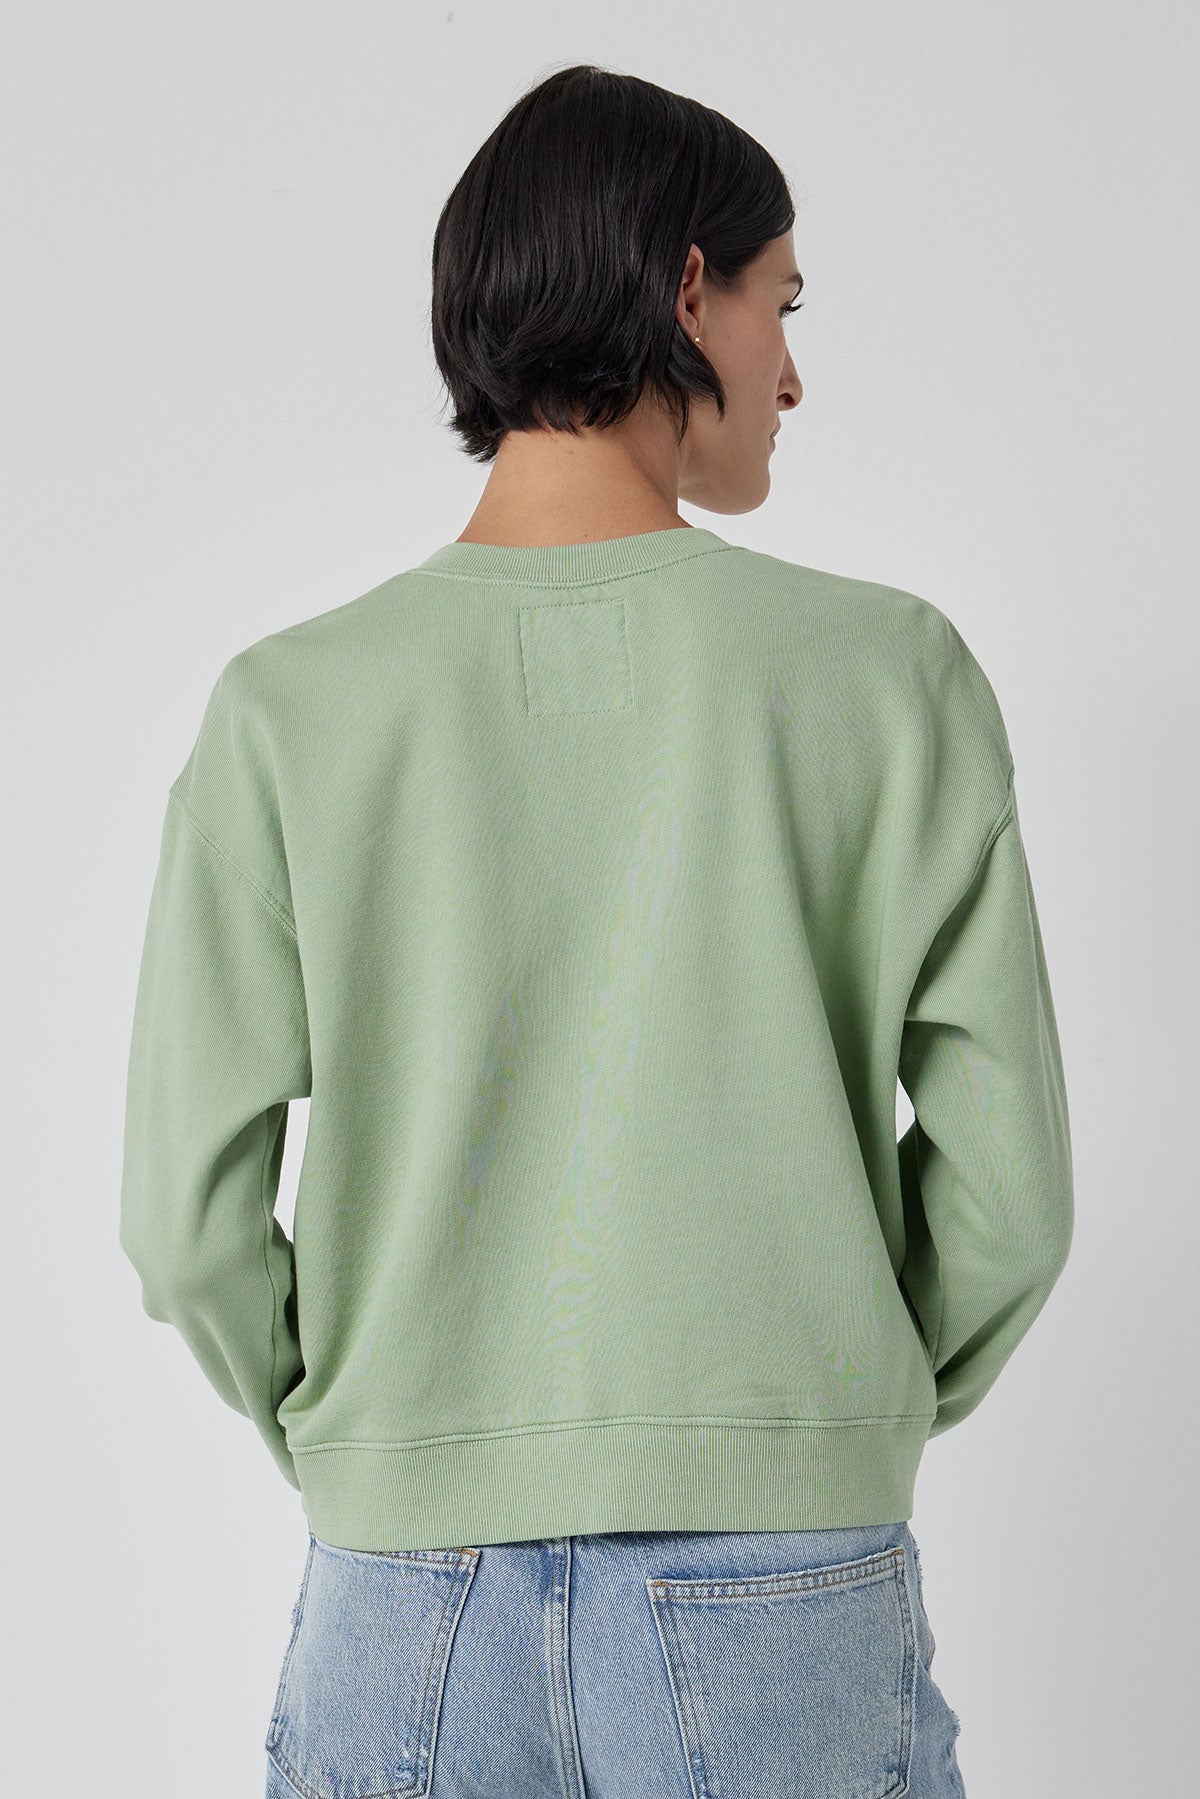   The back view of a woman in a Velvet by Jenny Graham YNEZ sweatshirt with dropped shoulders. 